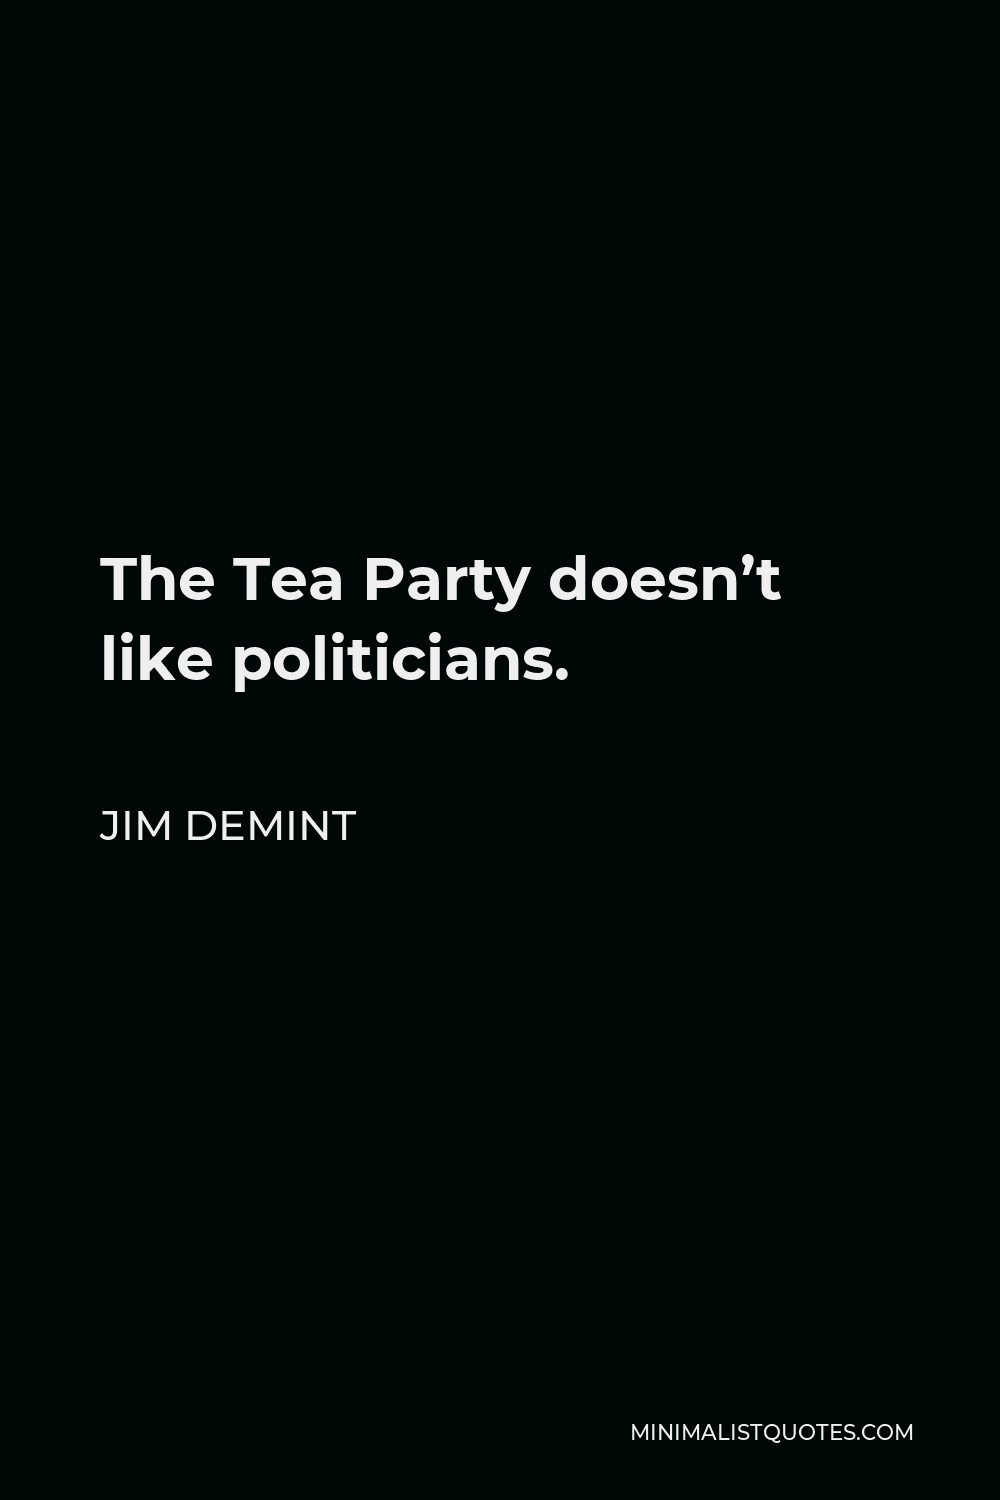 Jim Demint Quote The Tea Party Doesnt Like Politicians 3790